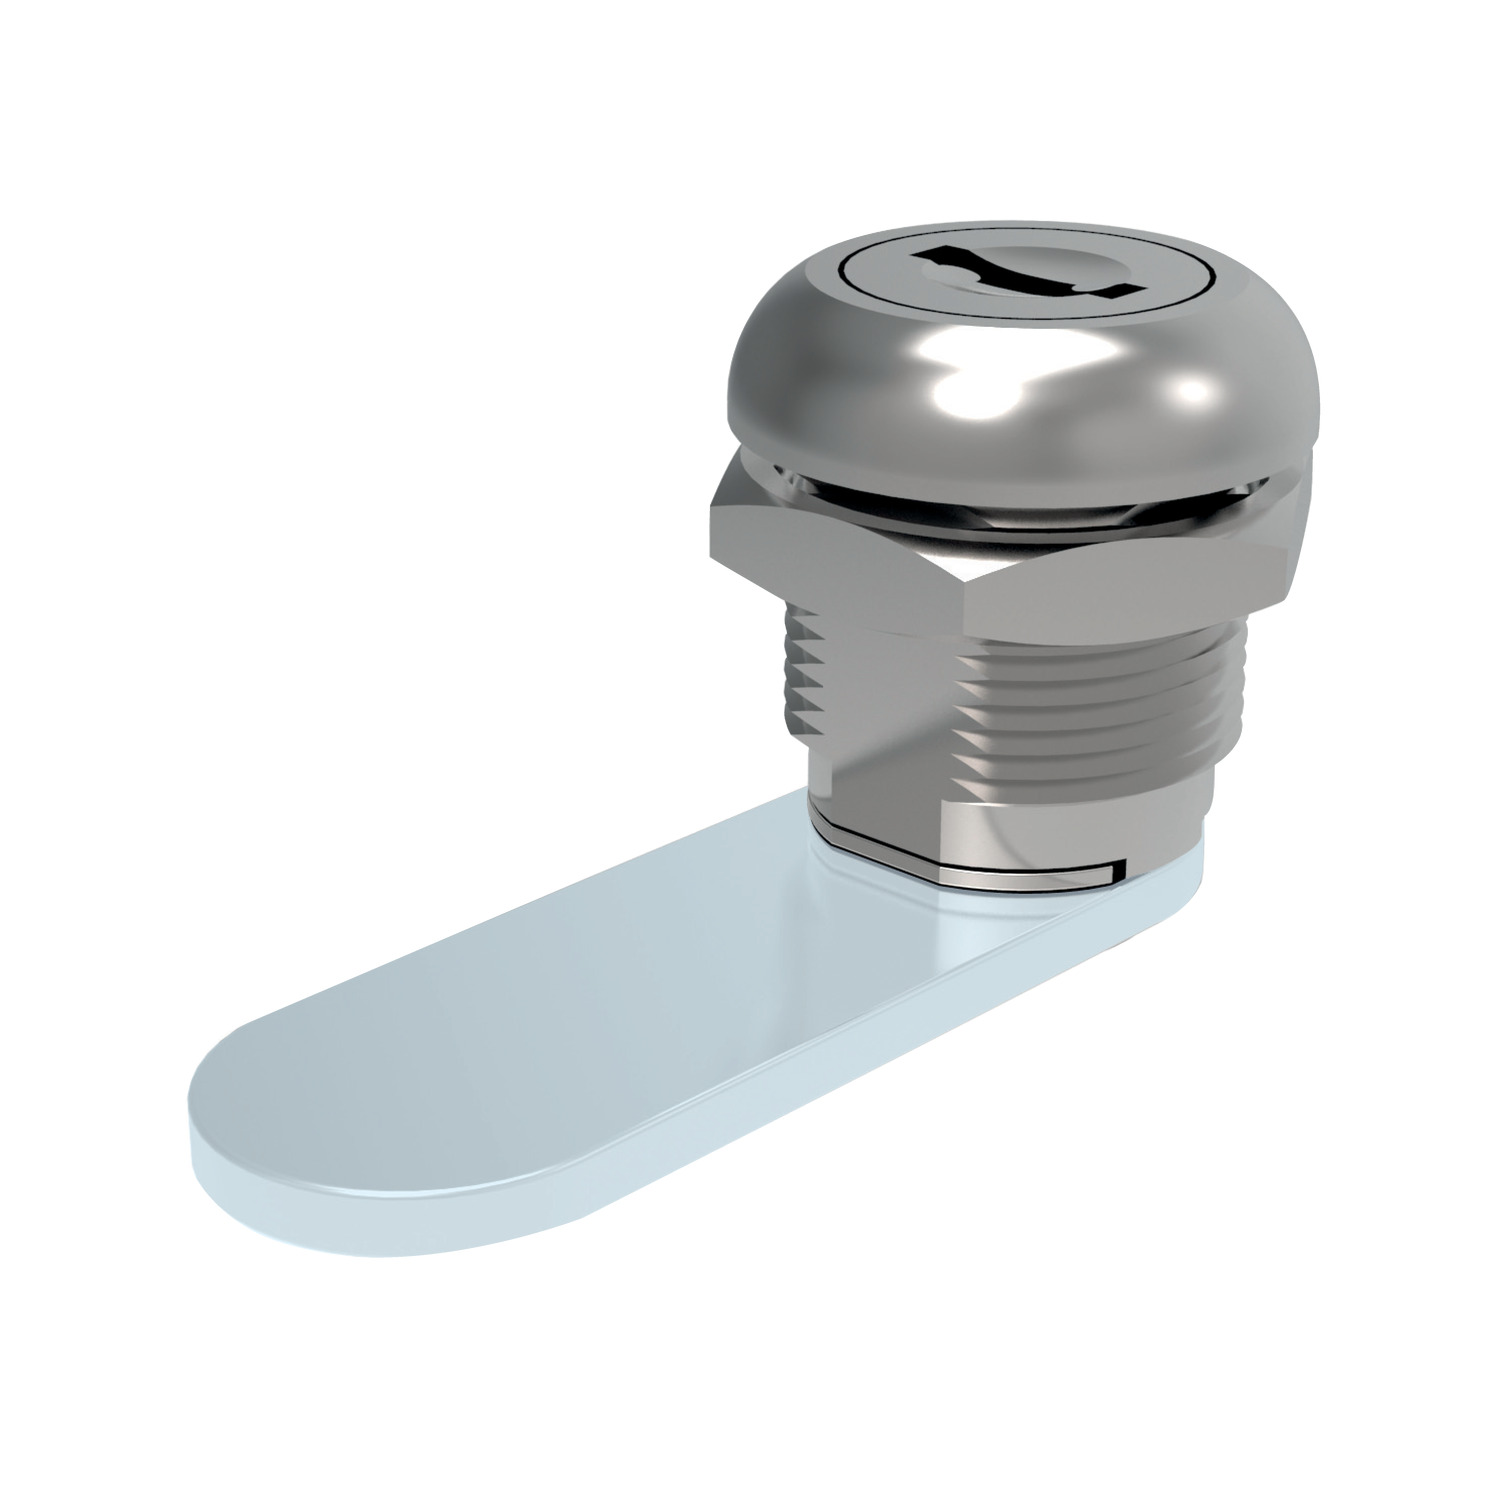 A2326.AW0010 Cam Lock - fixed grip plastic body- s/s cap - Keyed alike. . Use Cam - S1B40Y00003